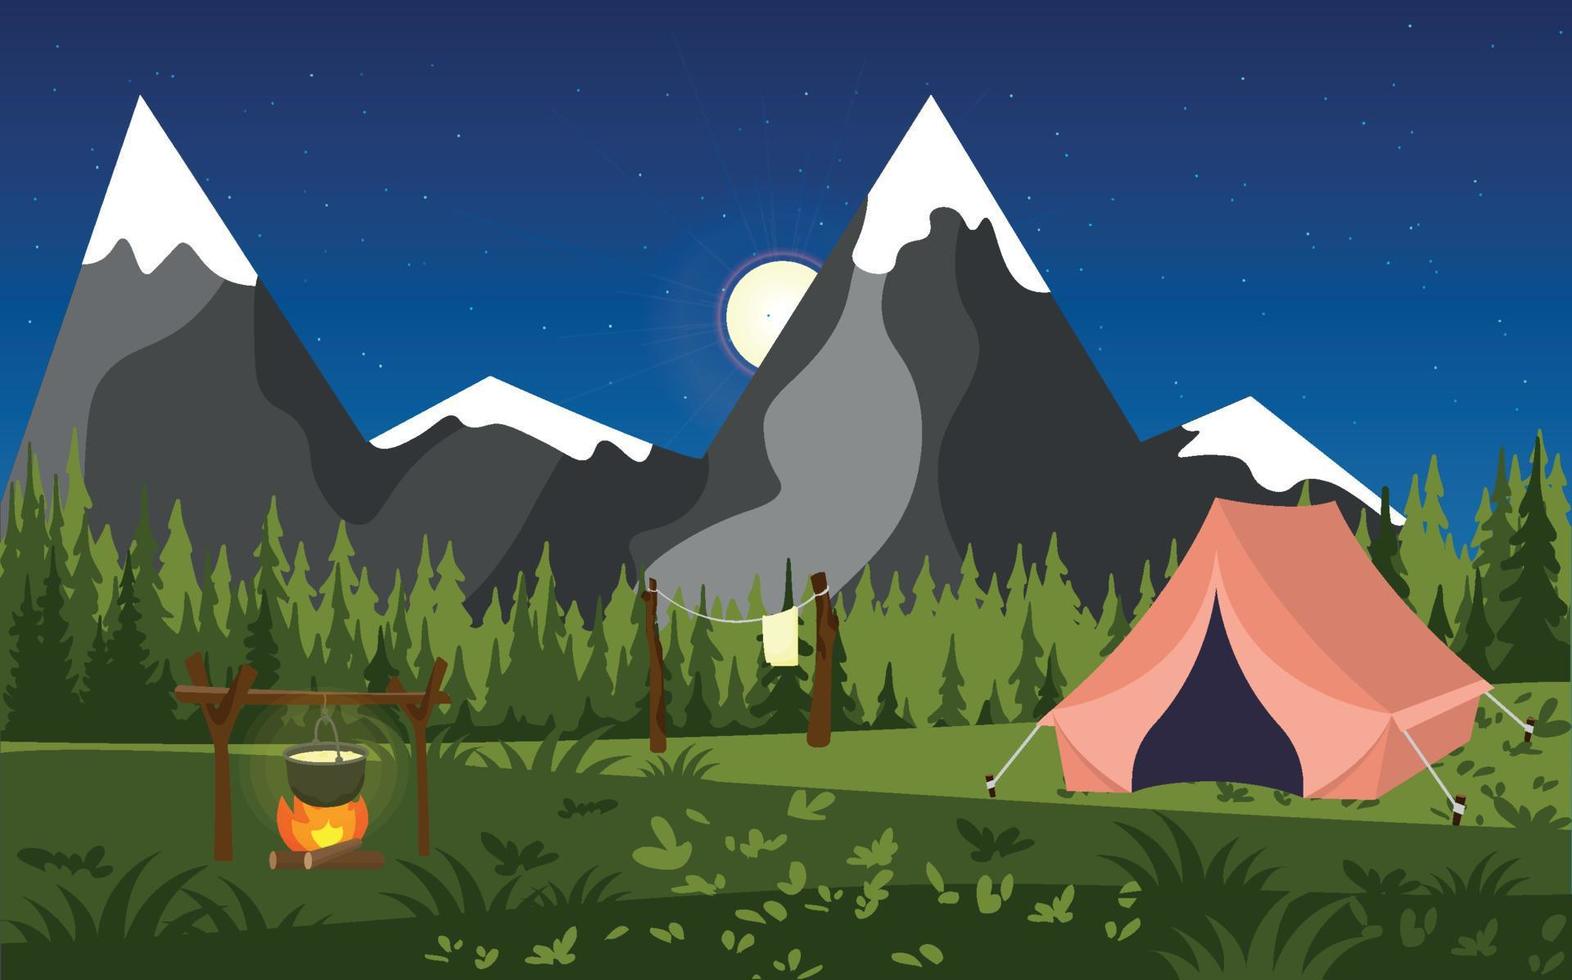 Sports, Camping, outdoor recreation, outdoor adventure, vacation.Night in nature. Vector illustration